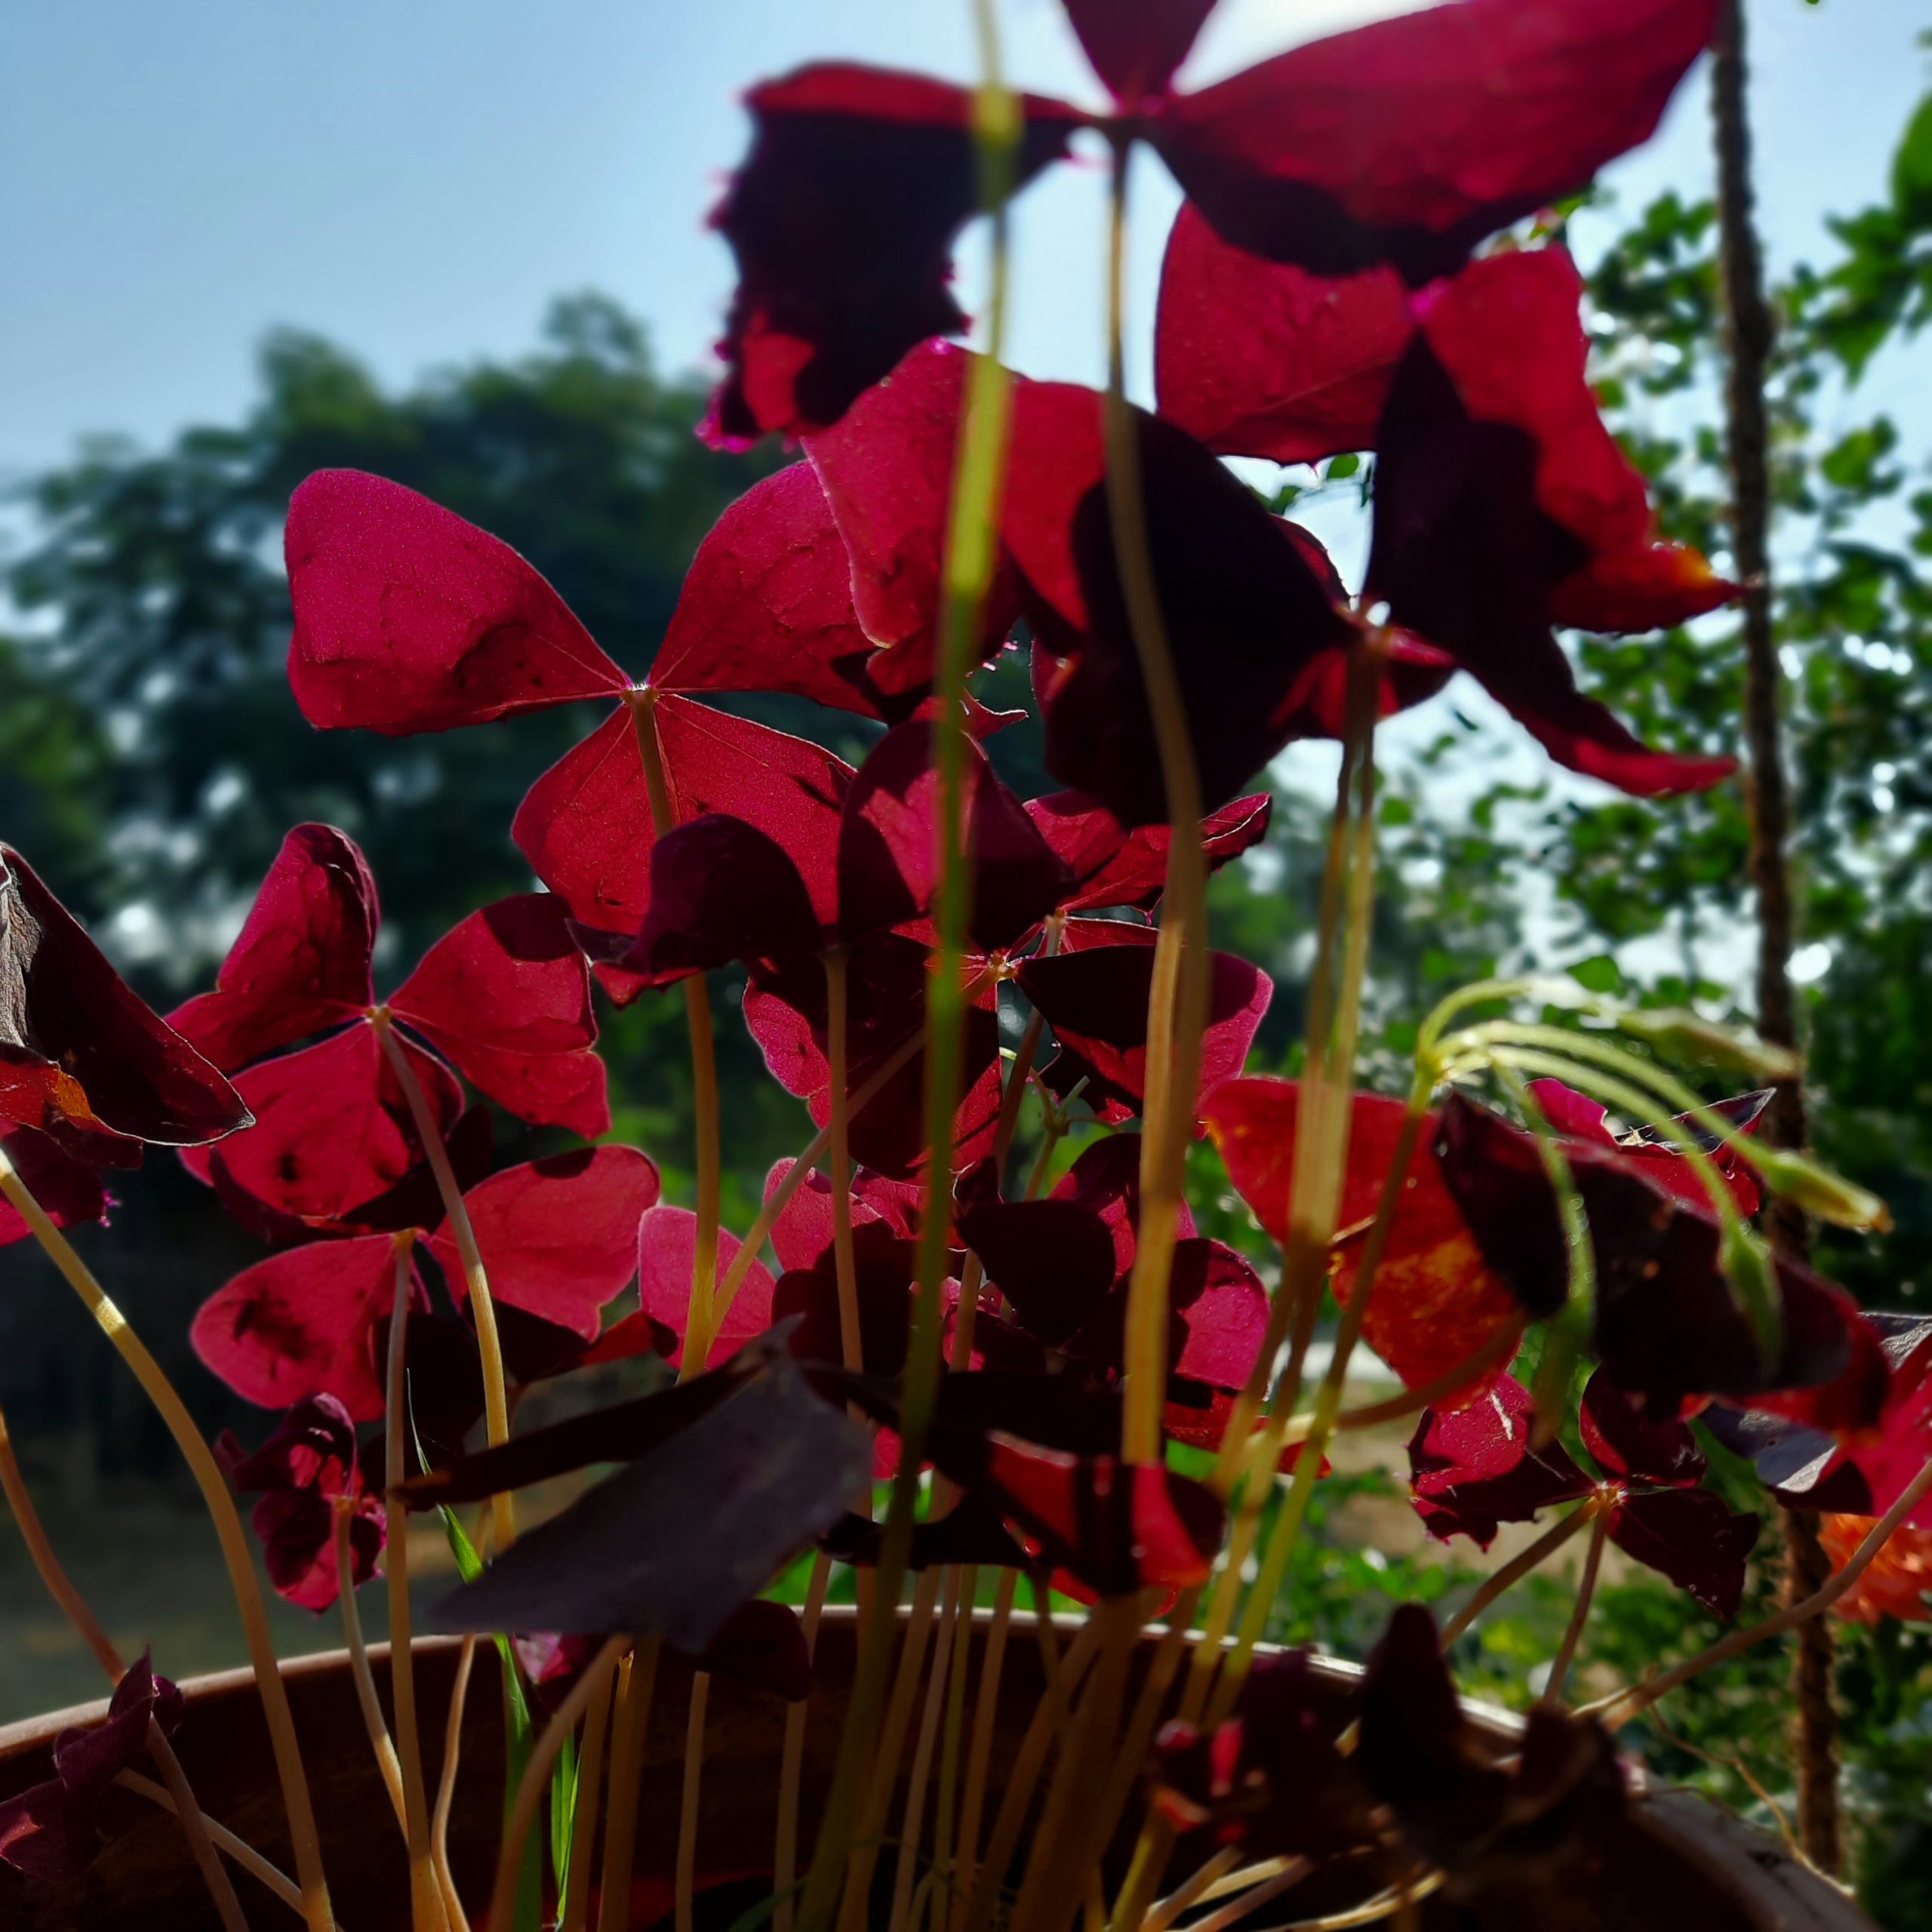 Red petals of a flowering plant